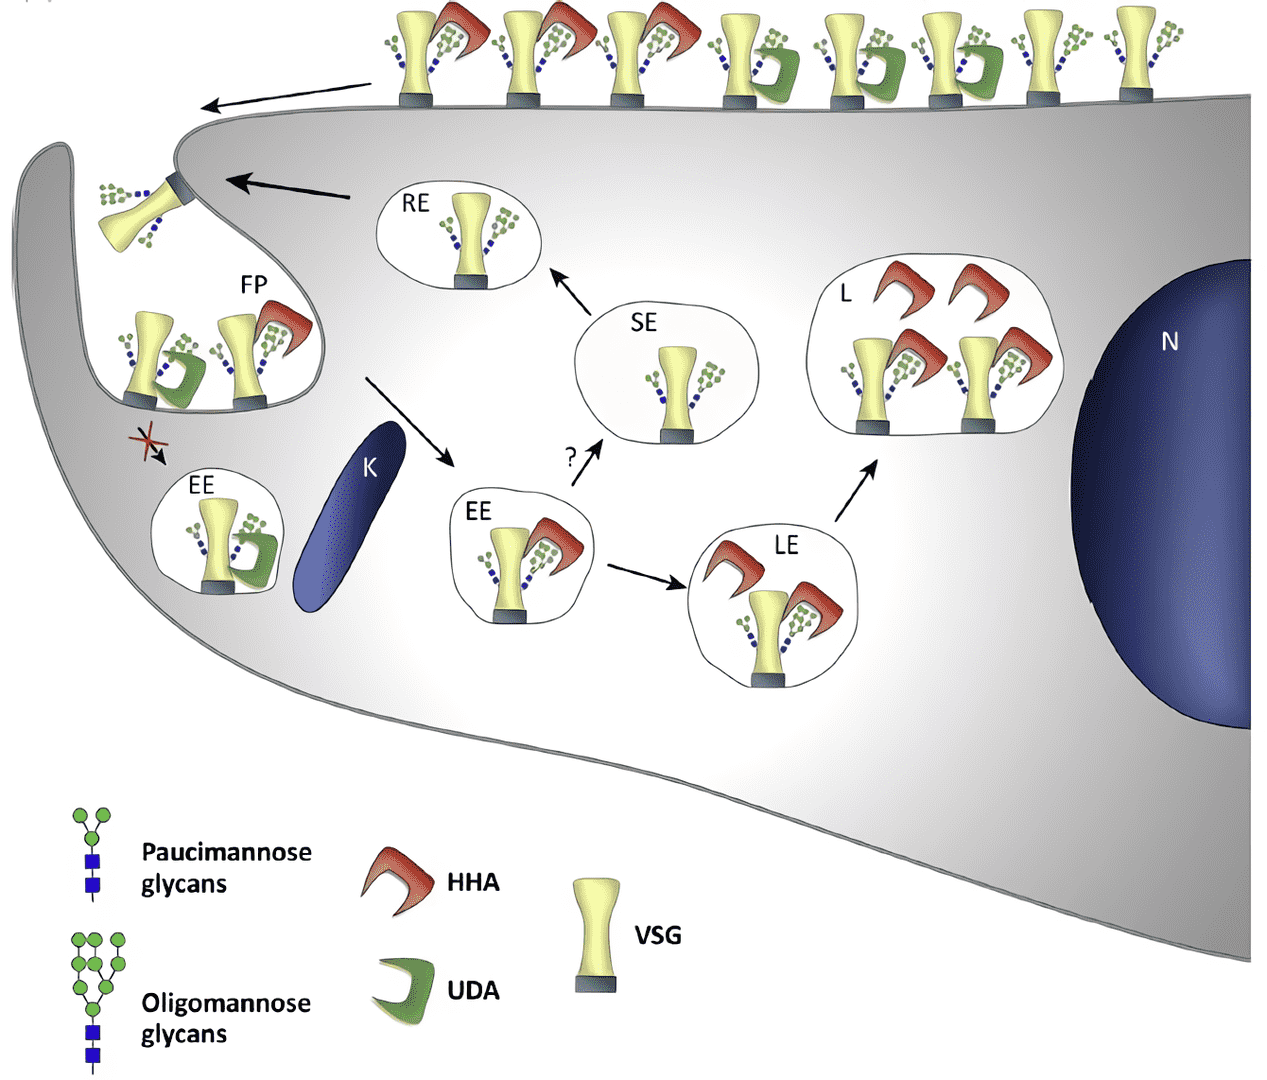 Endocytosis and secretion within the lysosomal/endosomal recycling system in Trypanosoma brucei. 